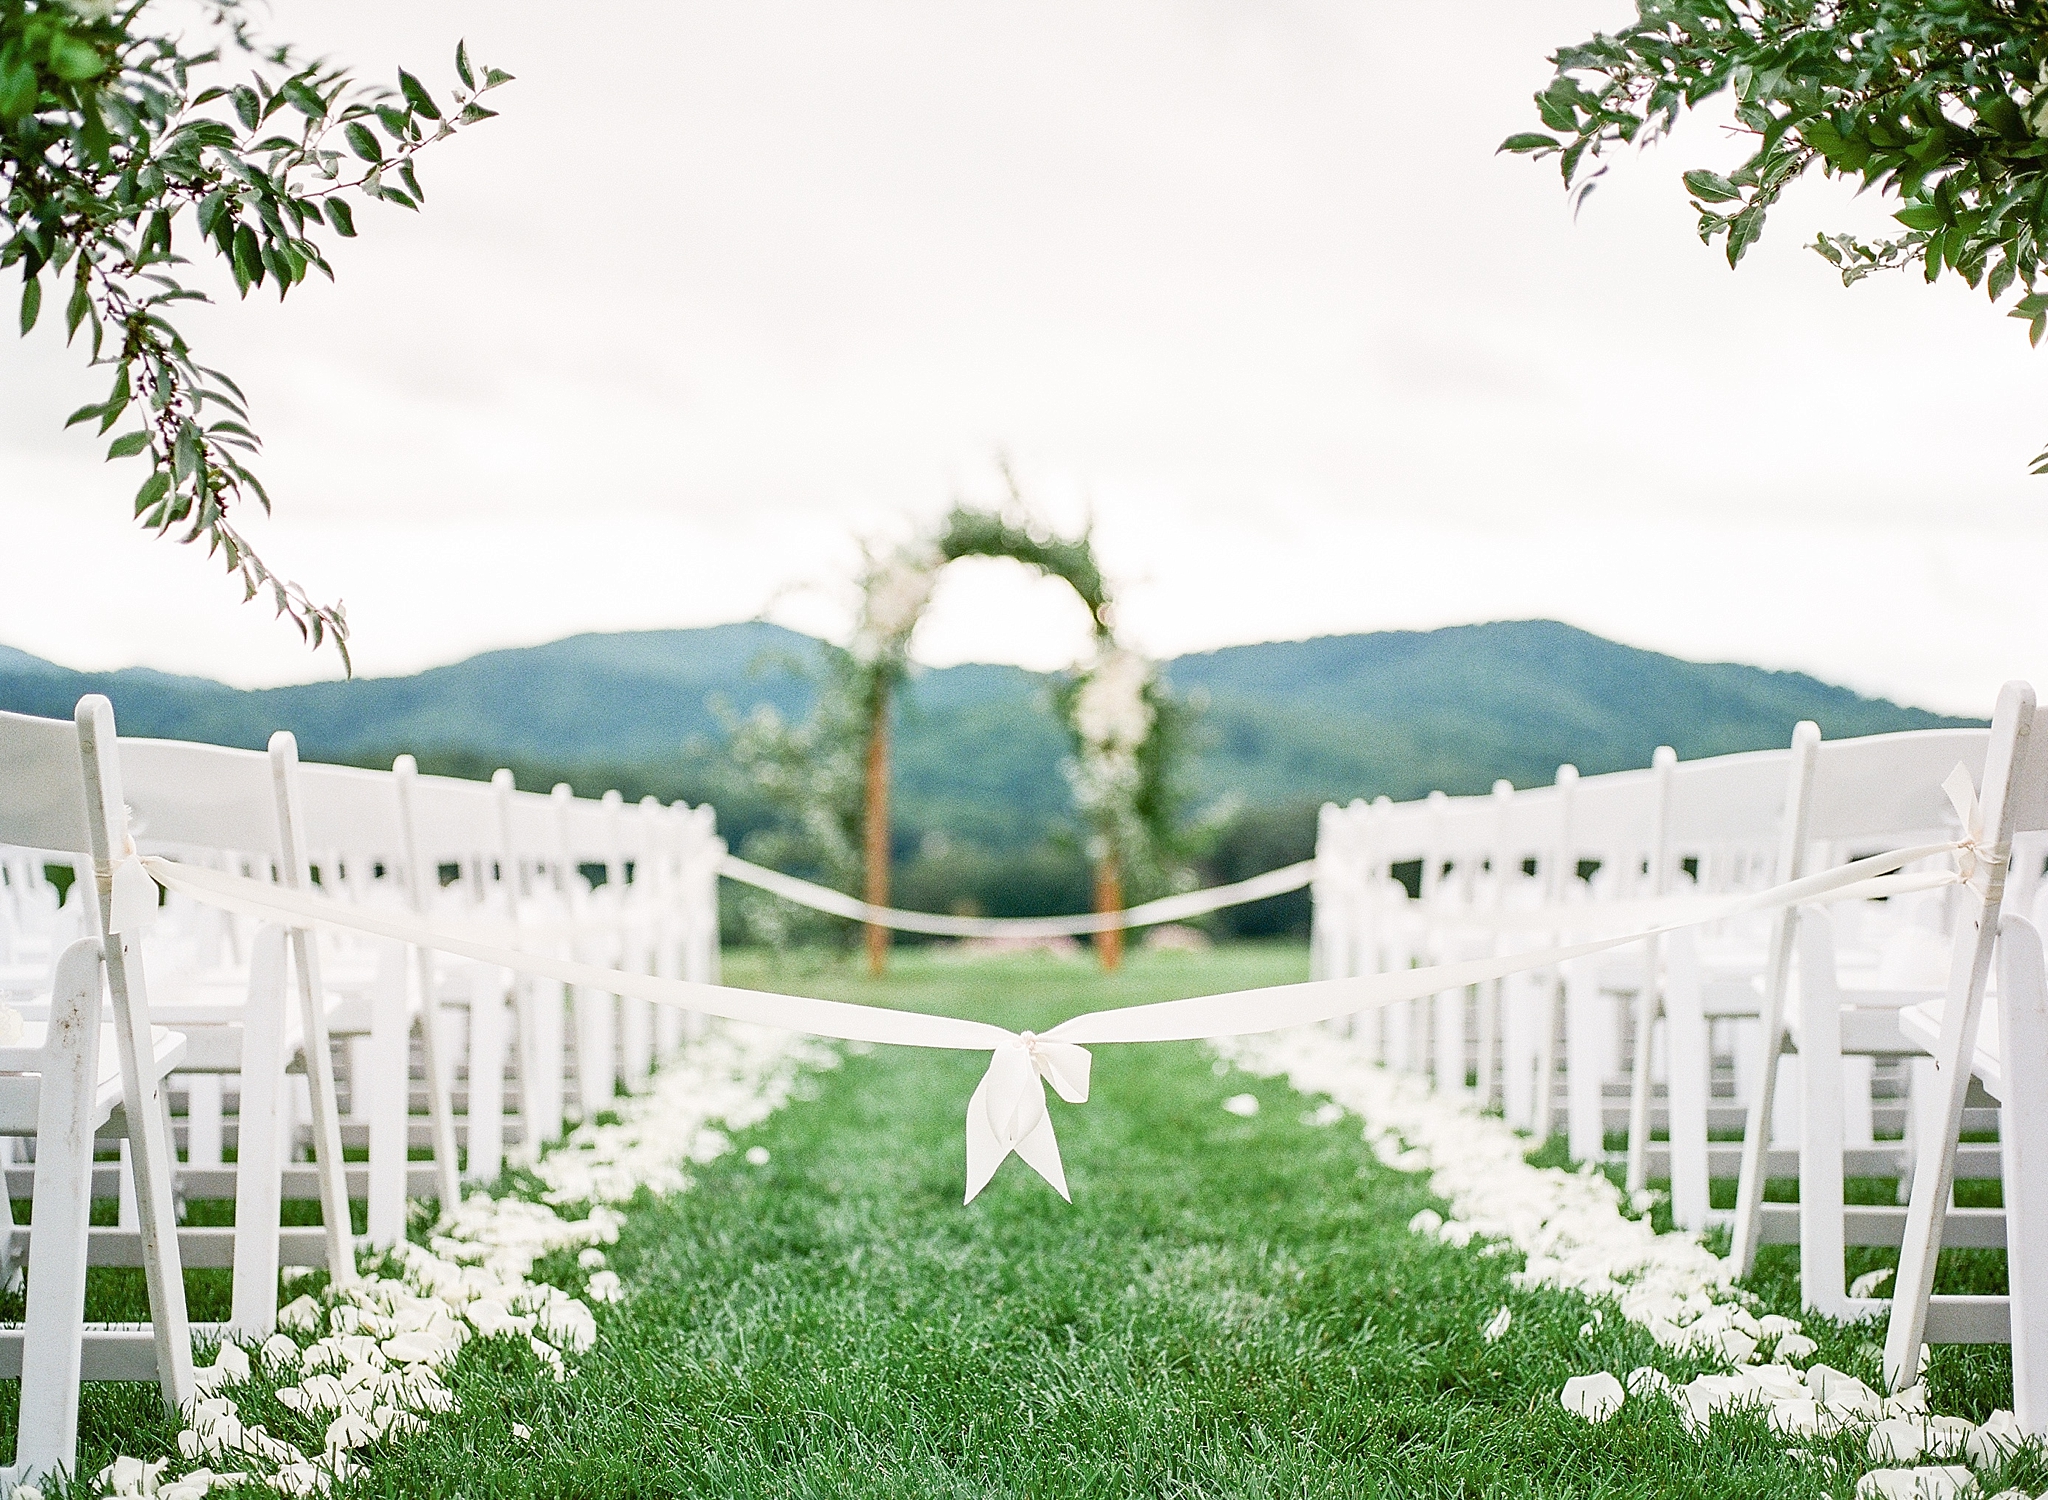 This elegant Pippin Hill wedding in Charlottesville, VA was designed by Amore Event Co and photographed by fine art film photographer, Alicia Lacey.